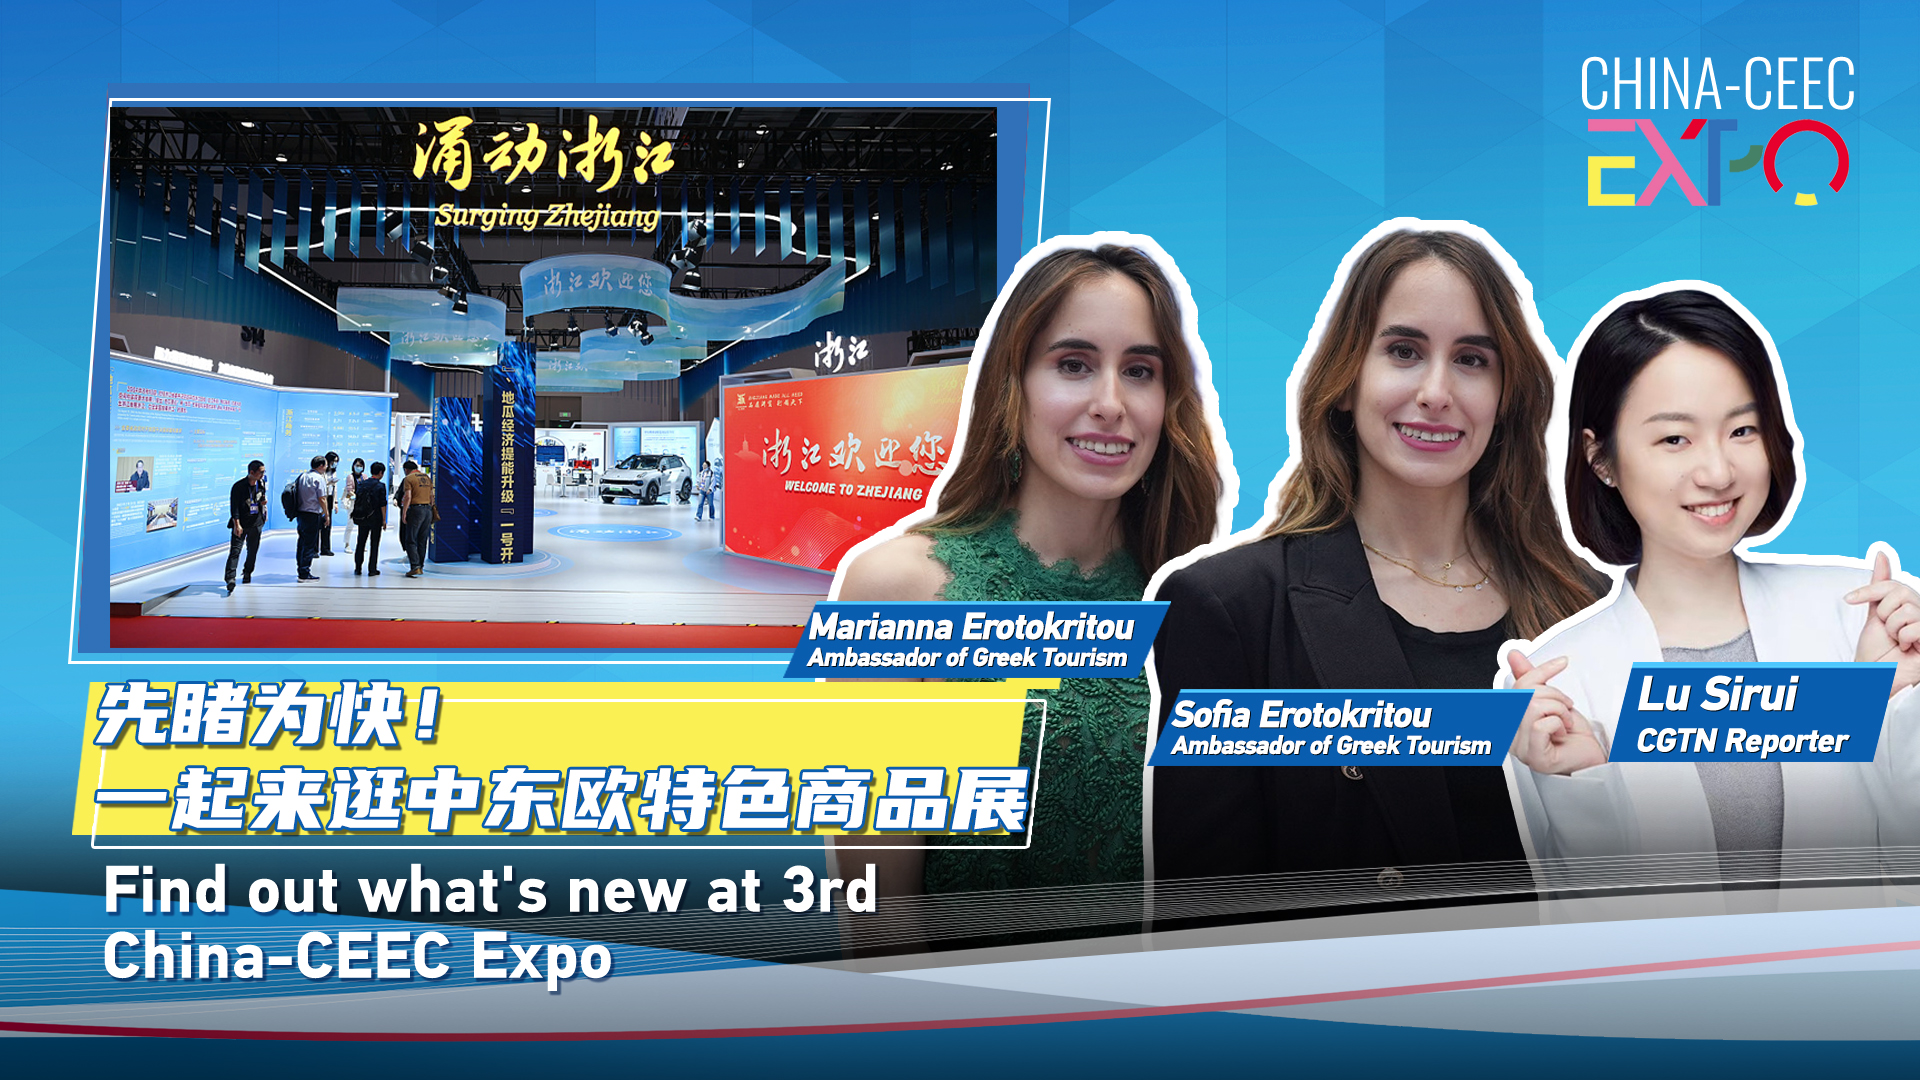 Live: Find out what's new at 3rd China-CEEC Expo